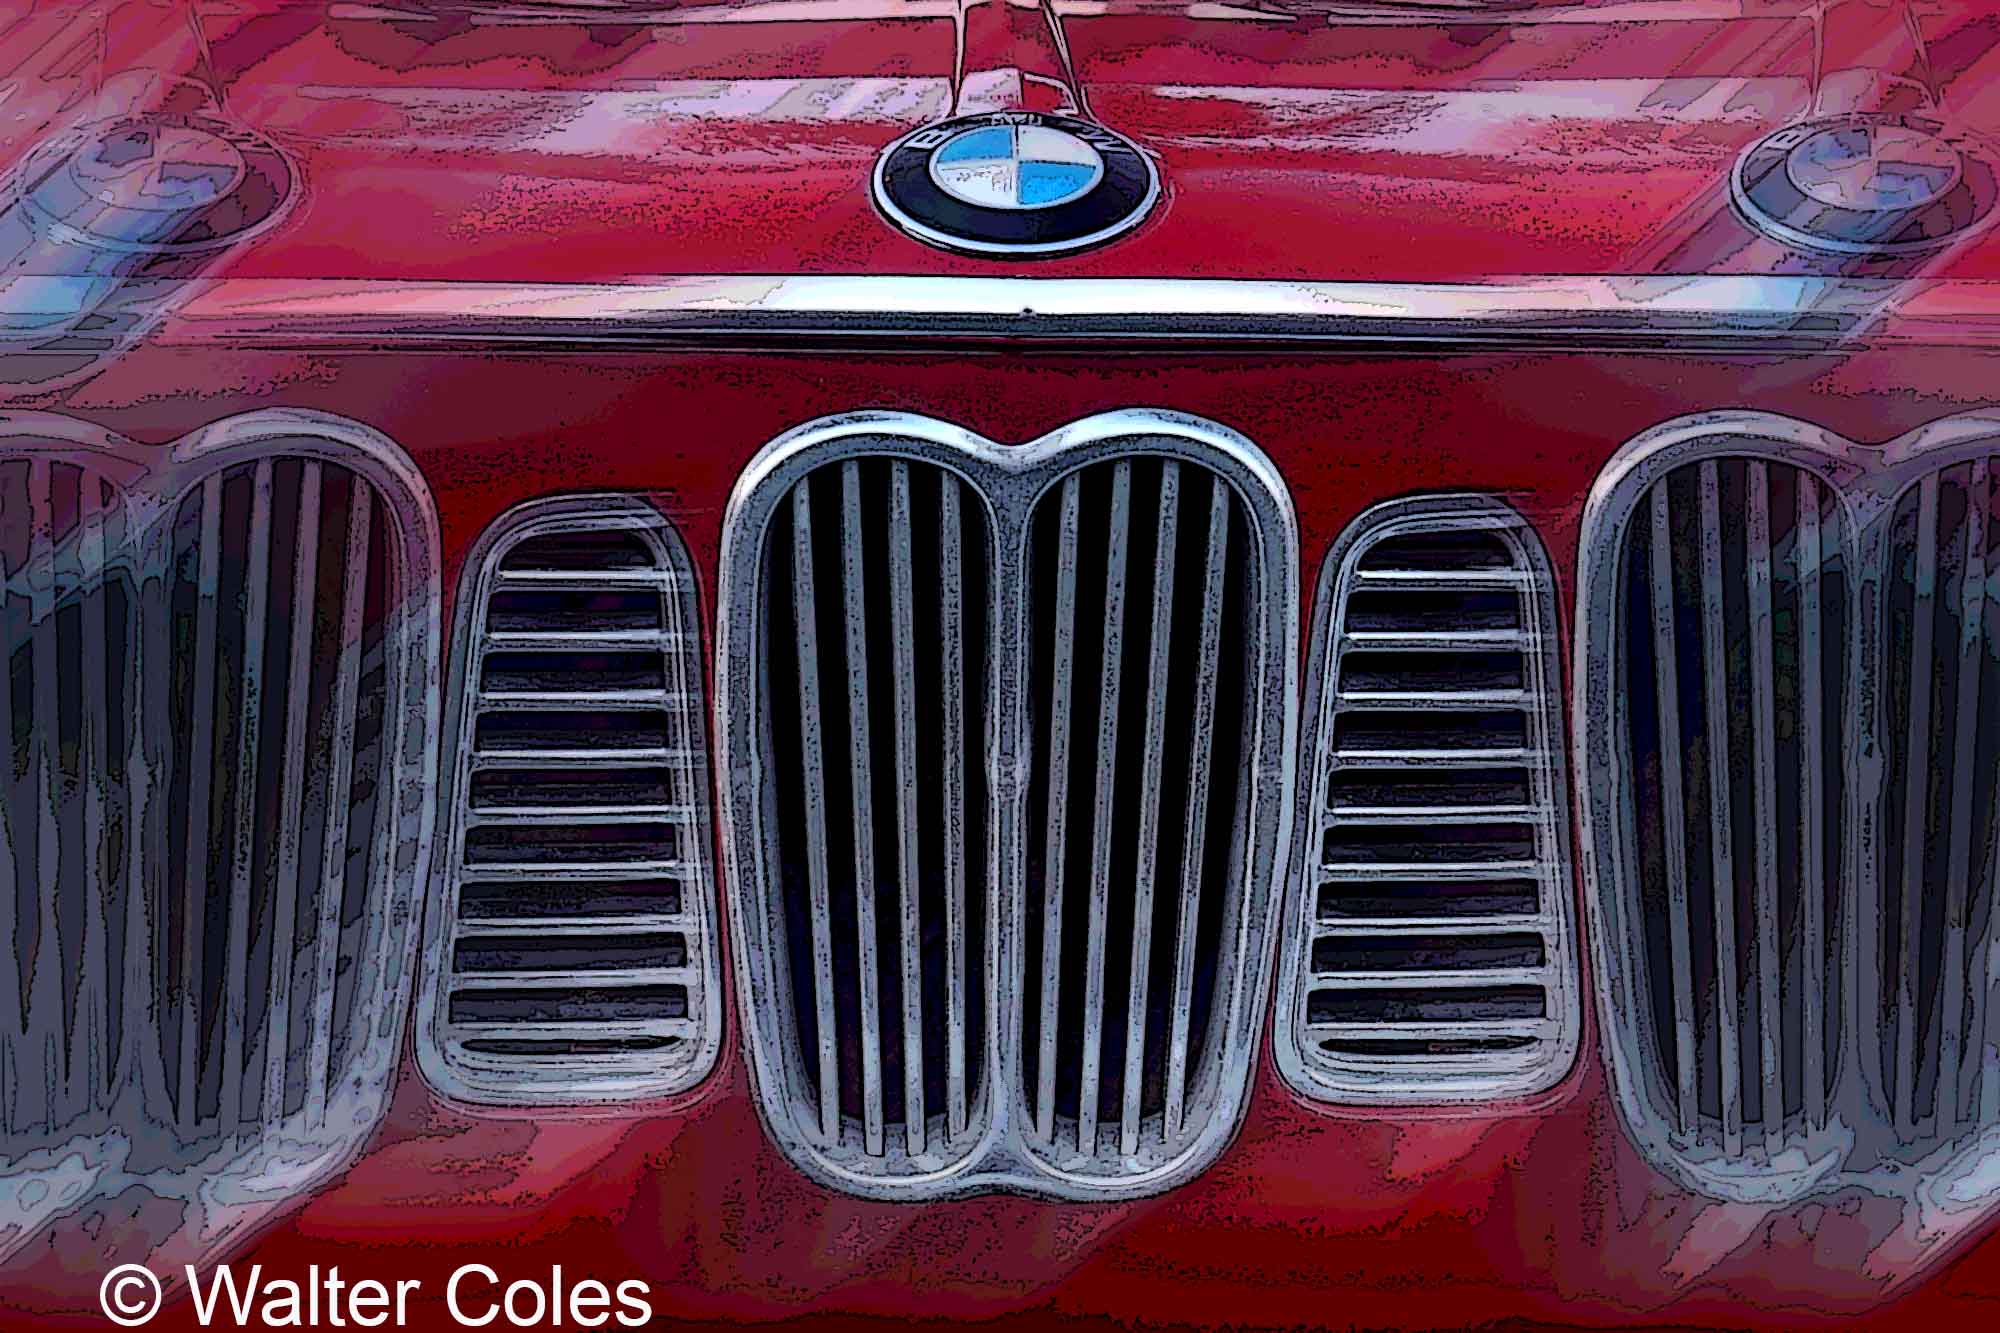 BMW_1990s_1600_Red_Coupe_DD_111619_2_Lens_Effects_w.jpg